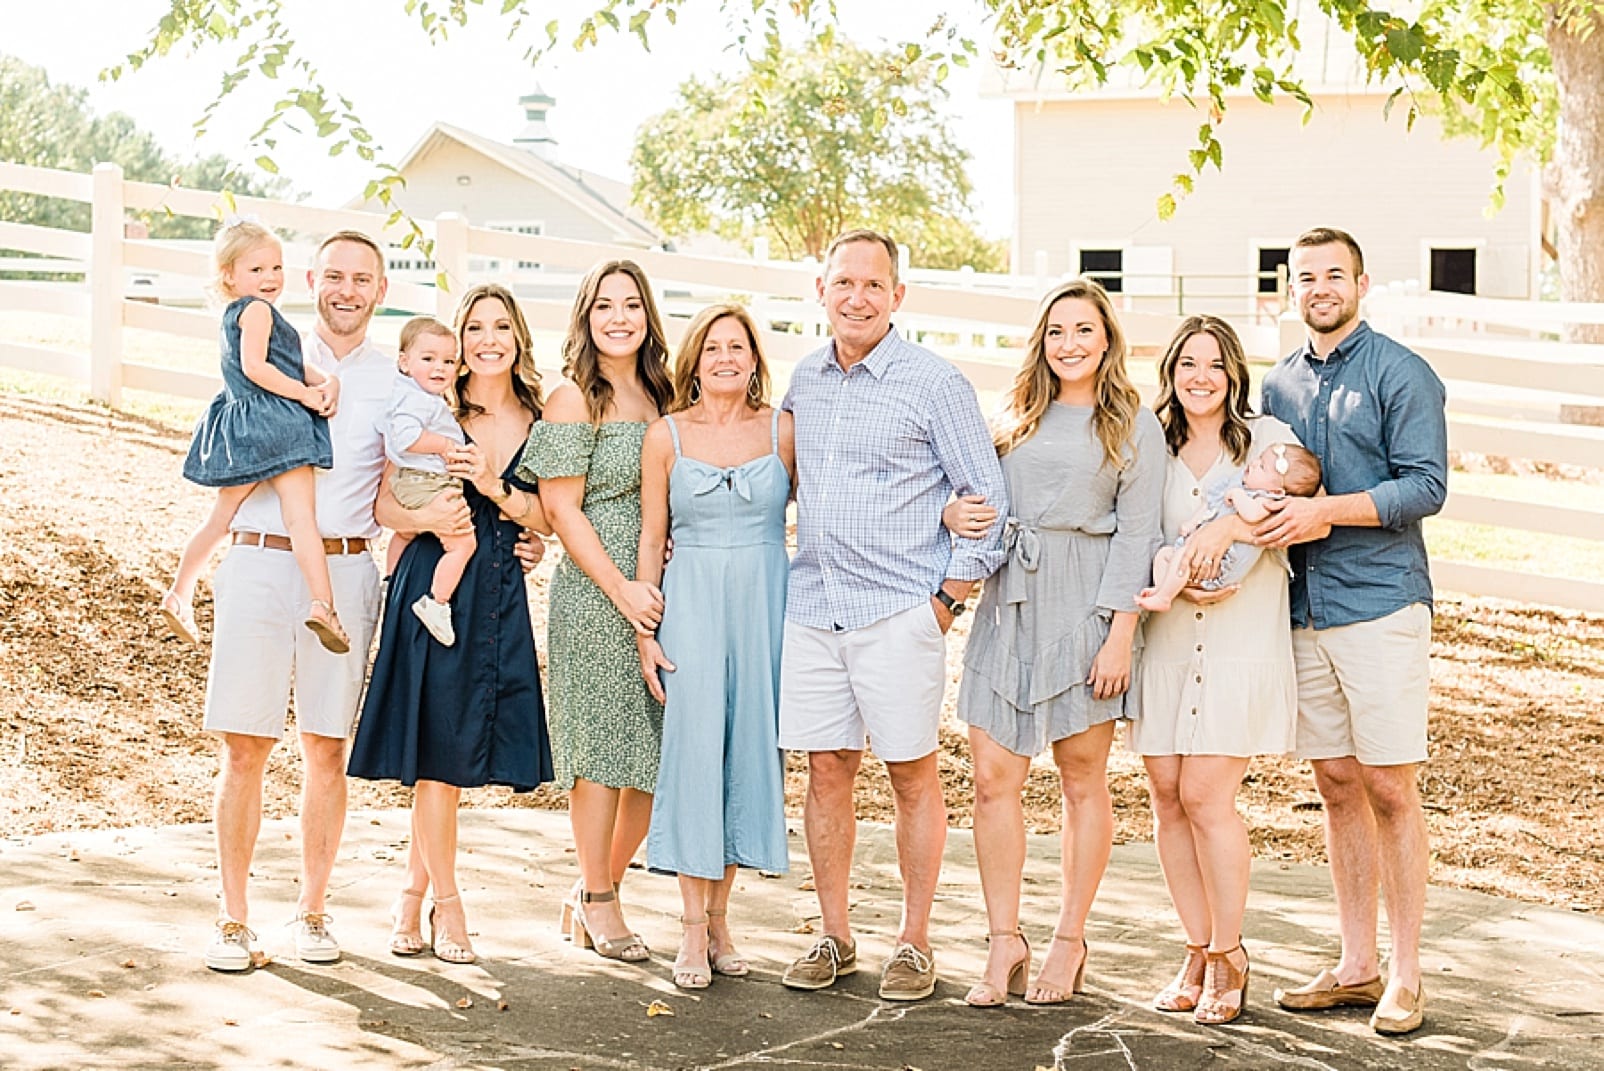 Wakefield Barn extended family session photo